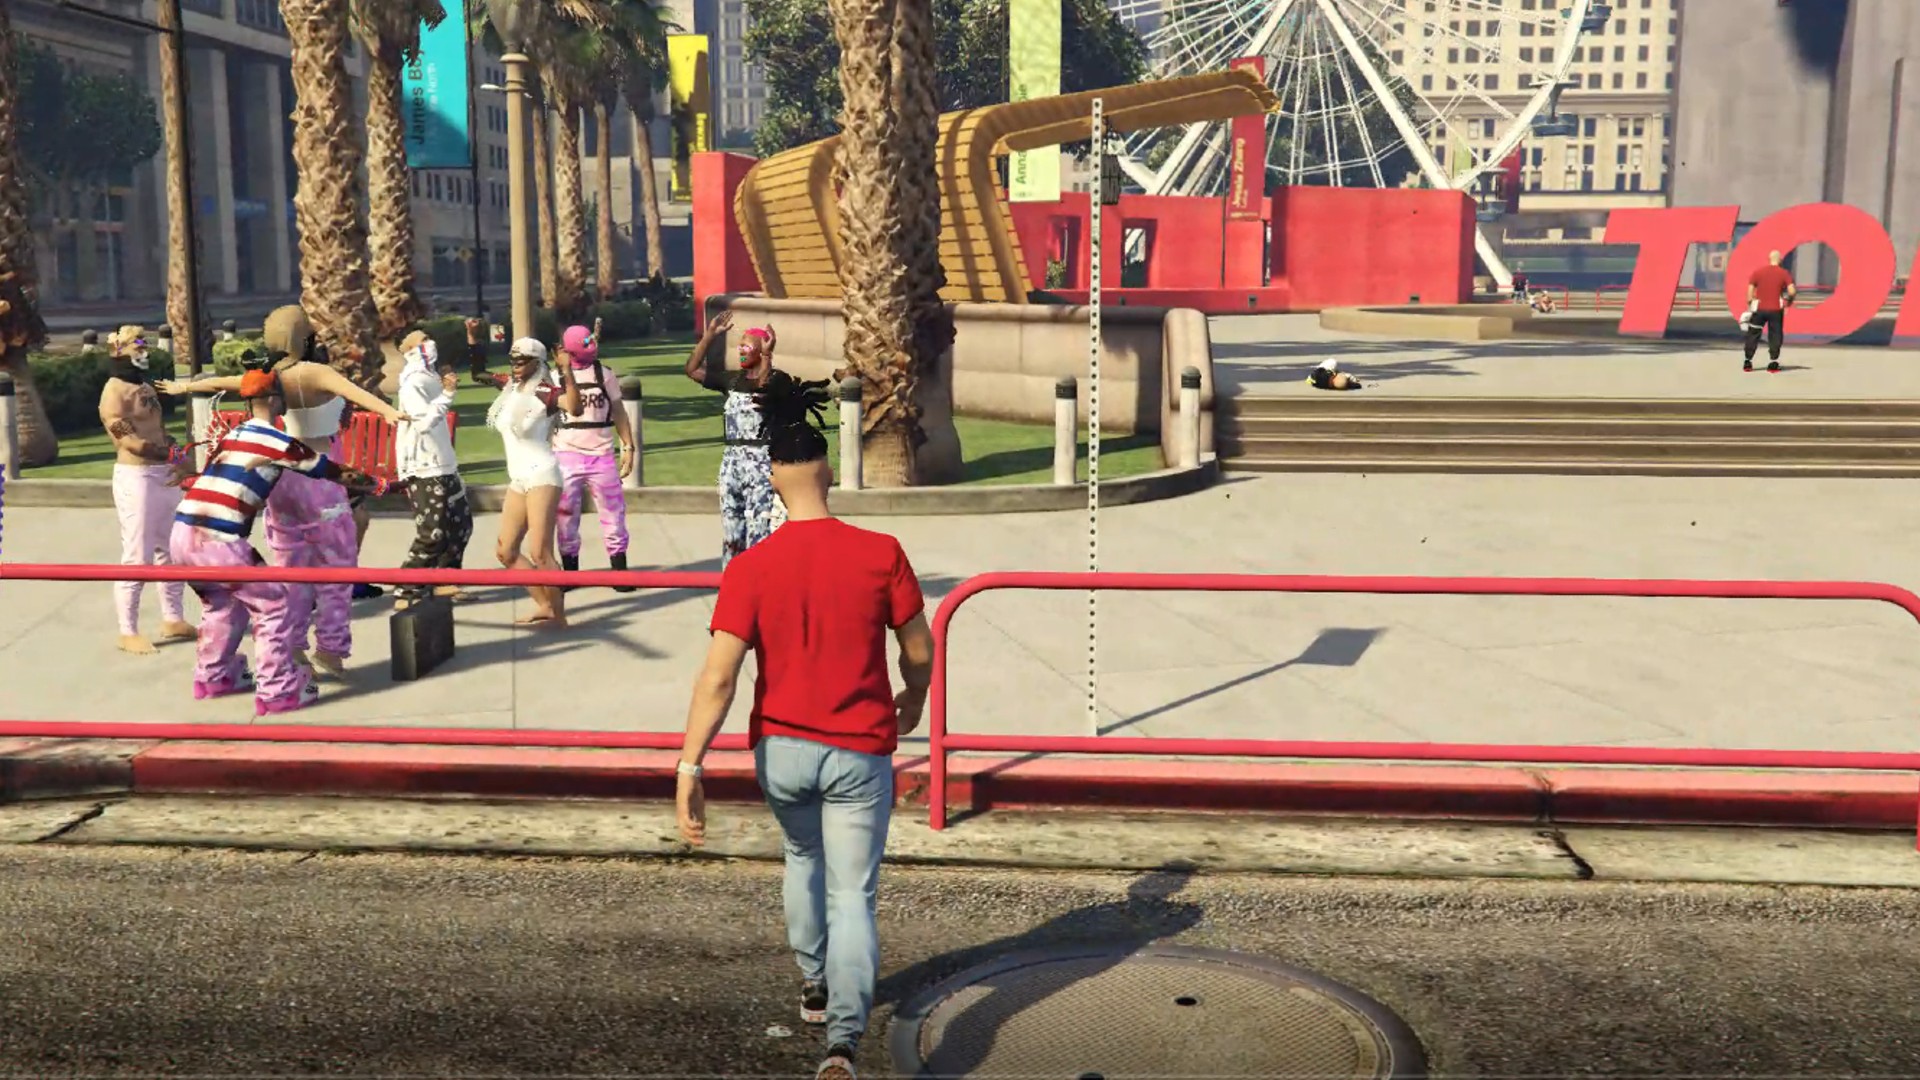 Grand Theft Auto V reaches its most realistic state yet with crazy new mod